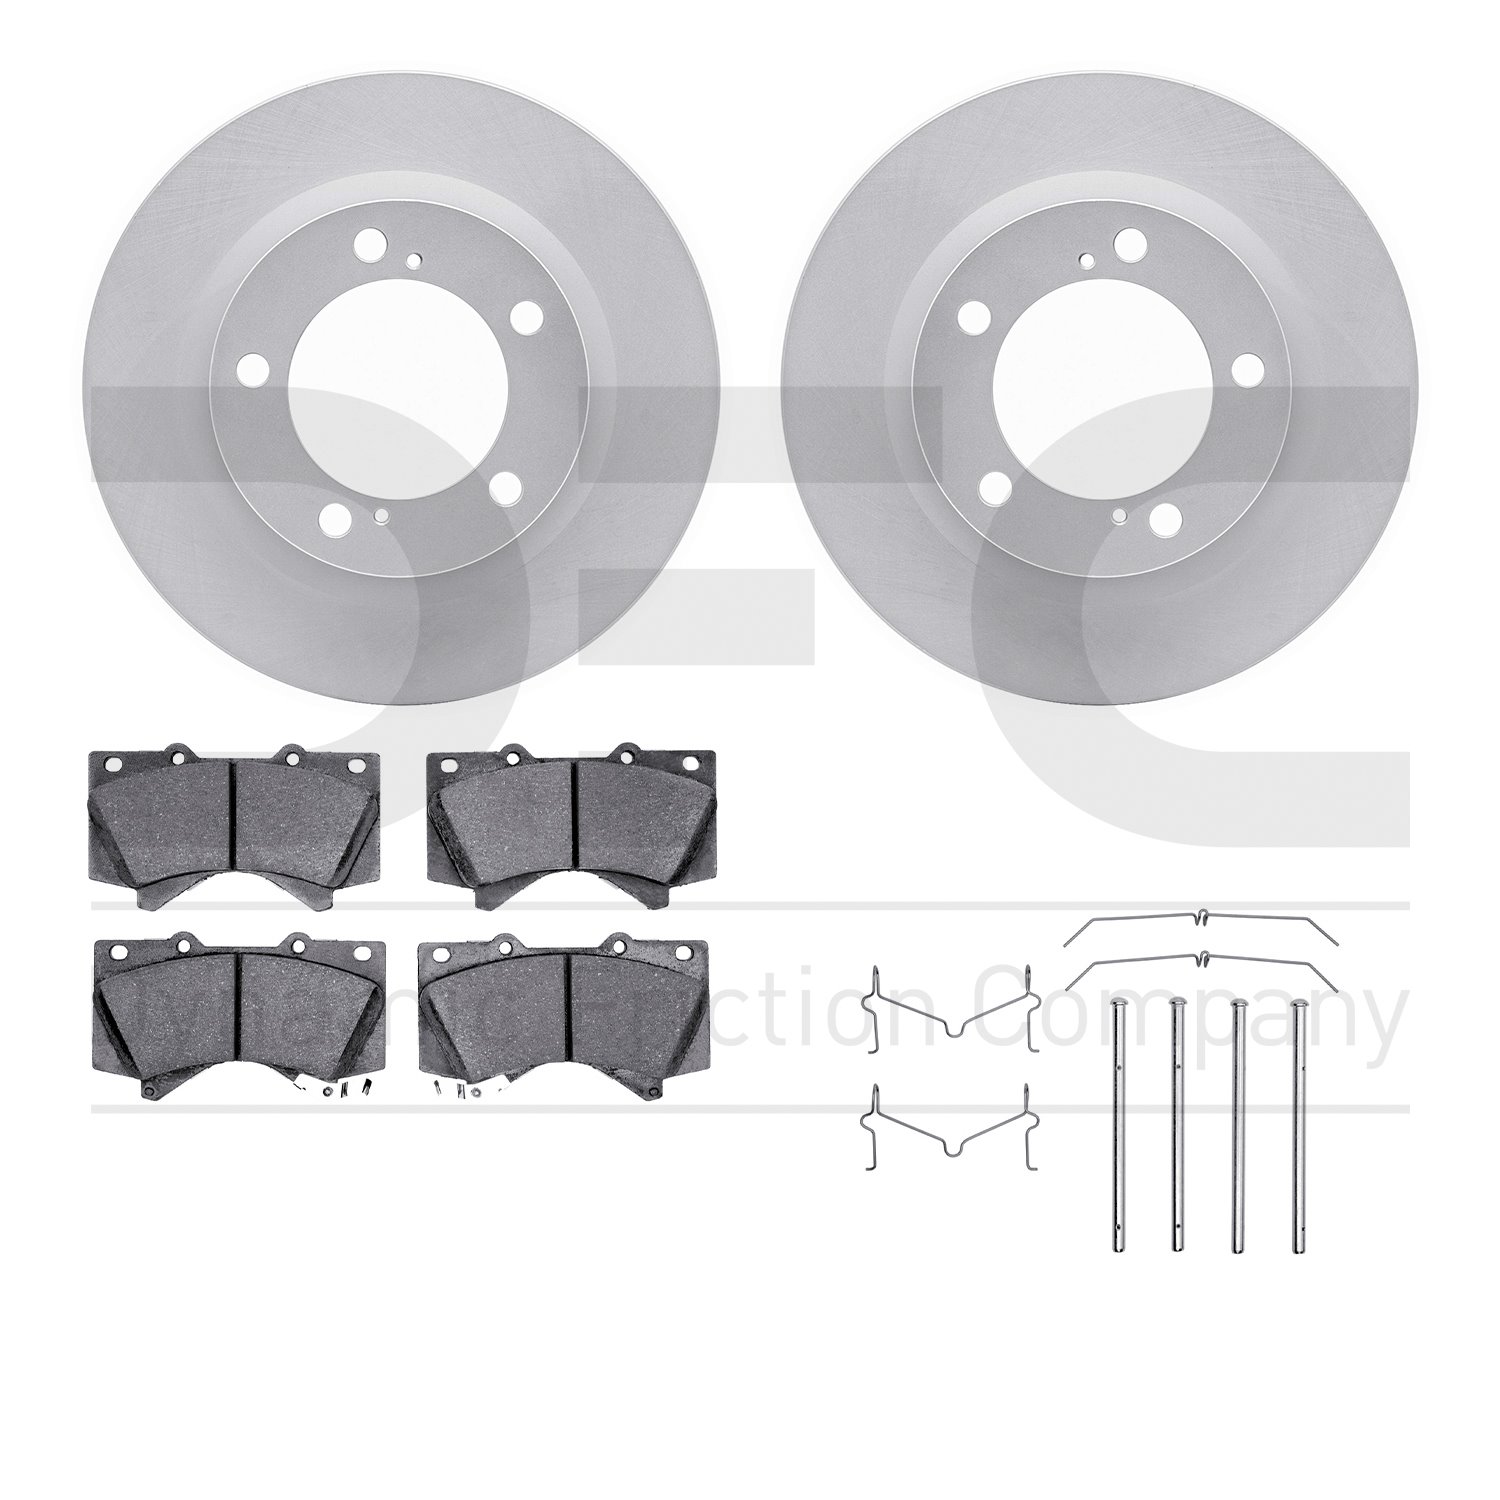 4412-76015 Geospec Brake Rotors with Ultimate-Duty Brake Pads & Hardware, 2008-2021 Lexus/Toyota/Scion, Position: Front